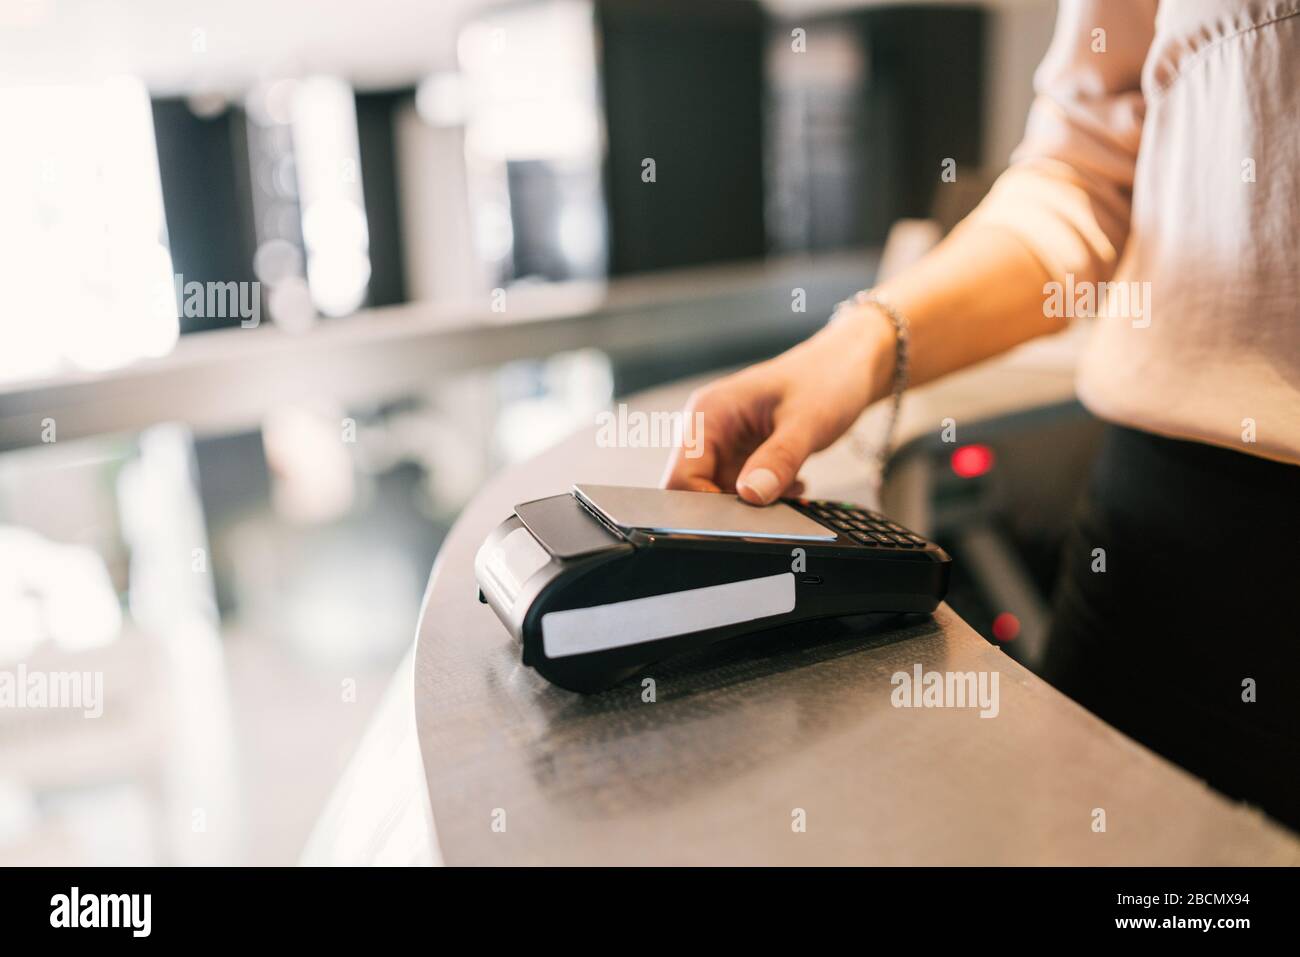 Close up of guest makes card payment at check-in at reception front desk. Travel concept. Stock Photo